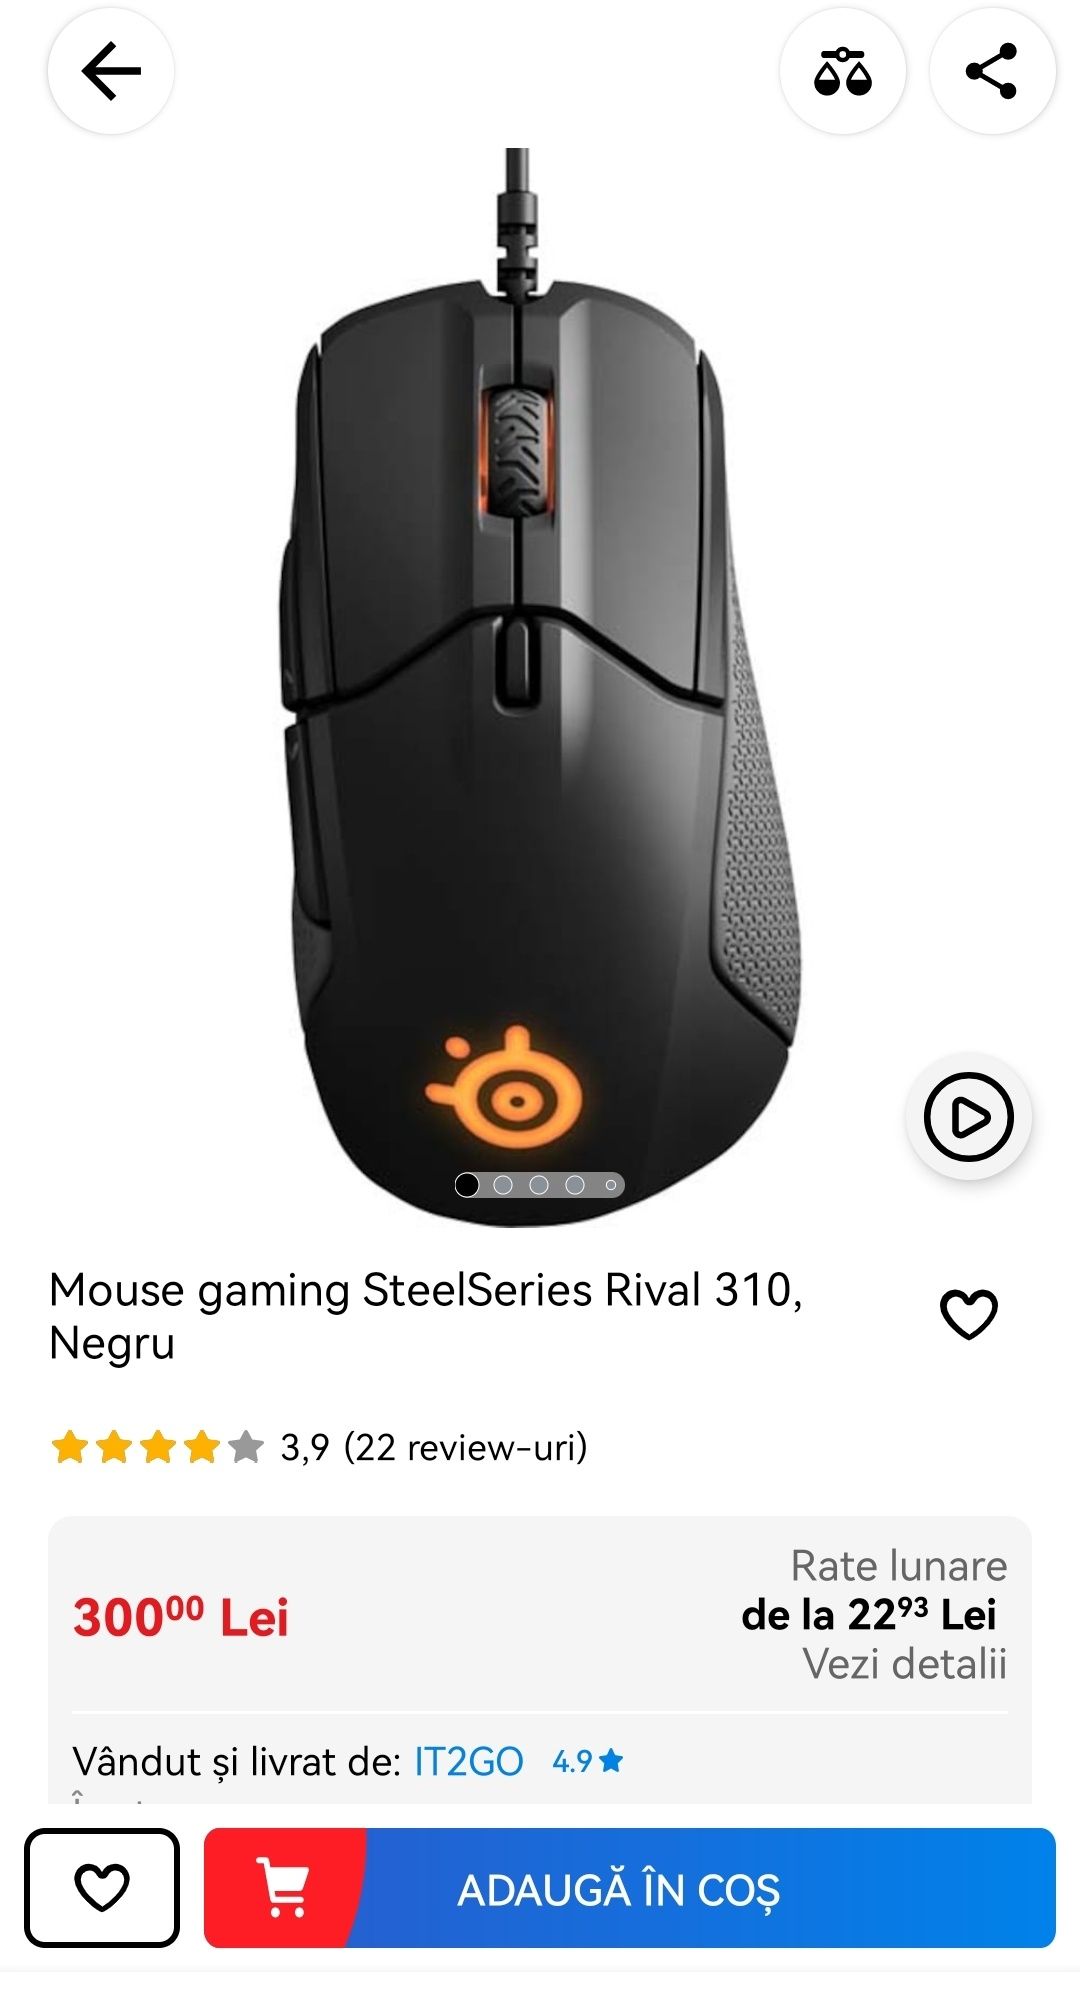 Mouse gaming SteelSeries Rival 310, Negru